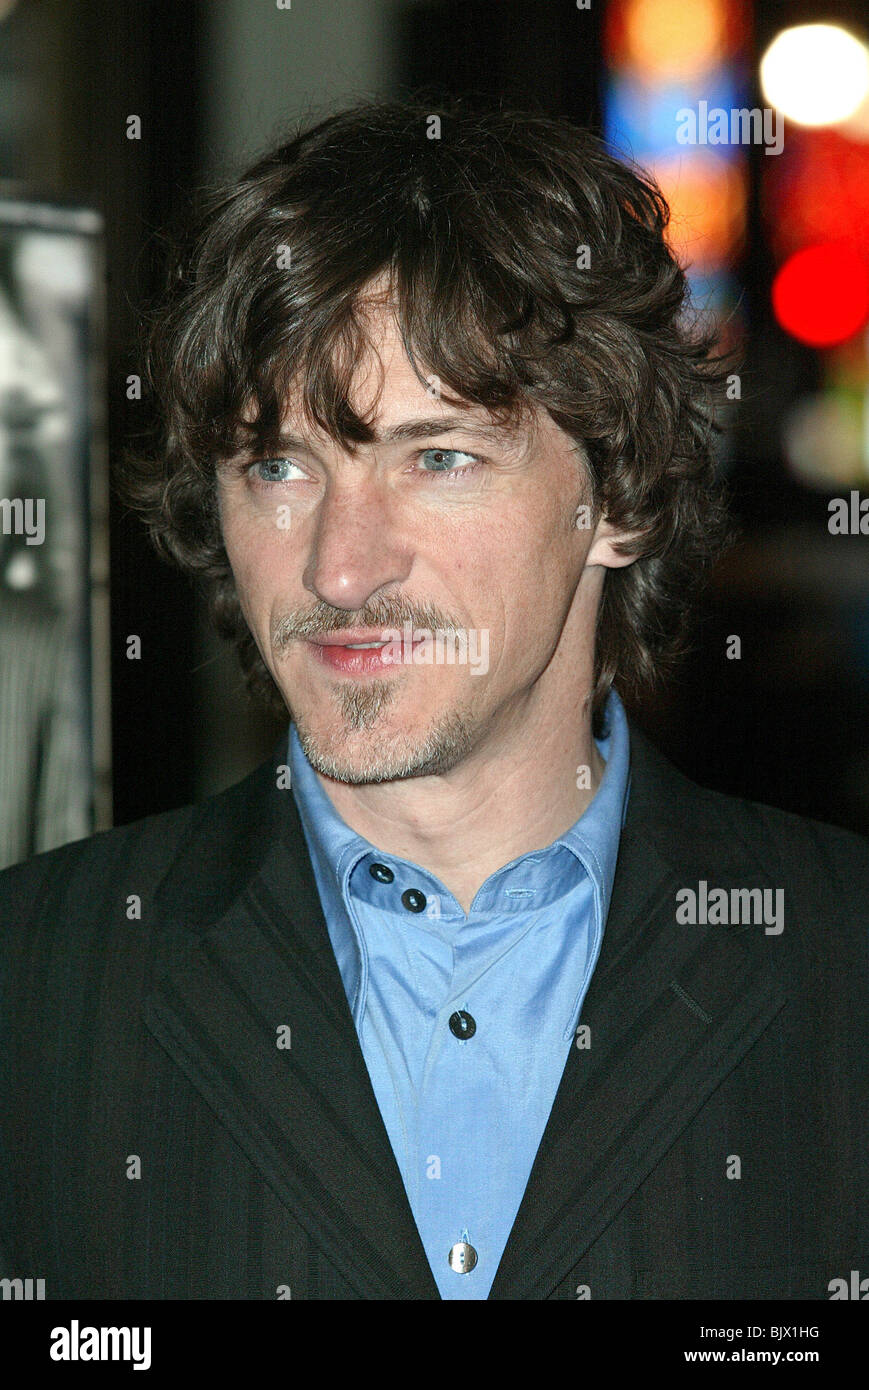 JOHN HAWKES DEADWOOD SEASON 2 PREMIERE CHINESE THEATRE HOLLYWOOD LOS ANGELES USA 03 March 2005 Stock Photo